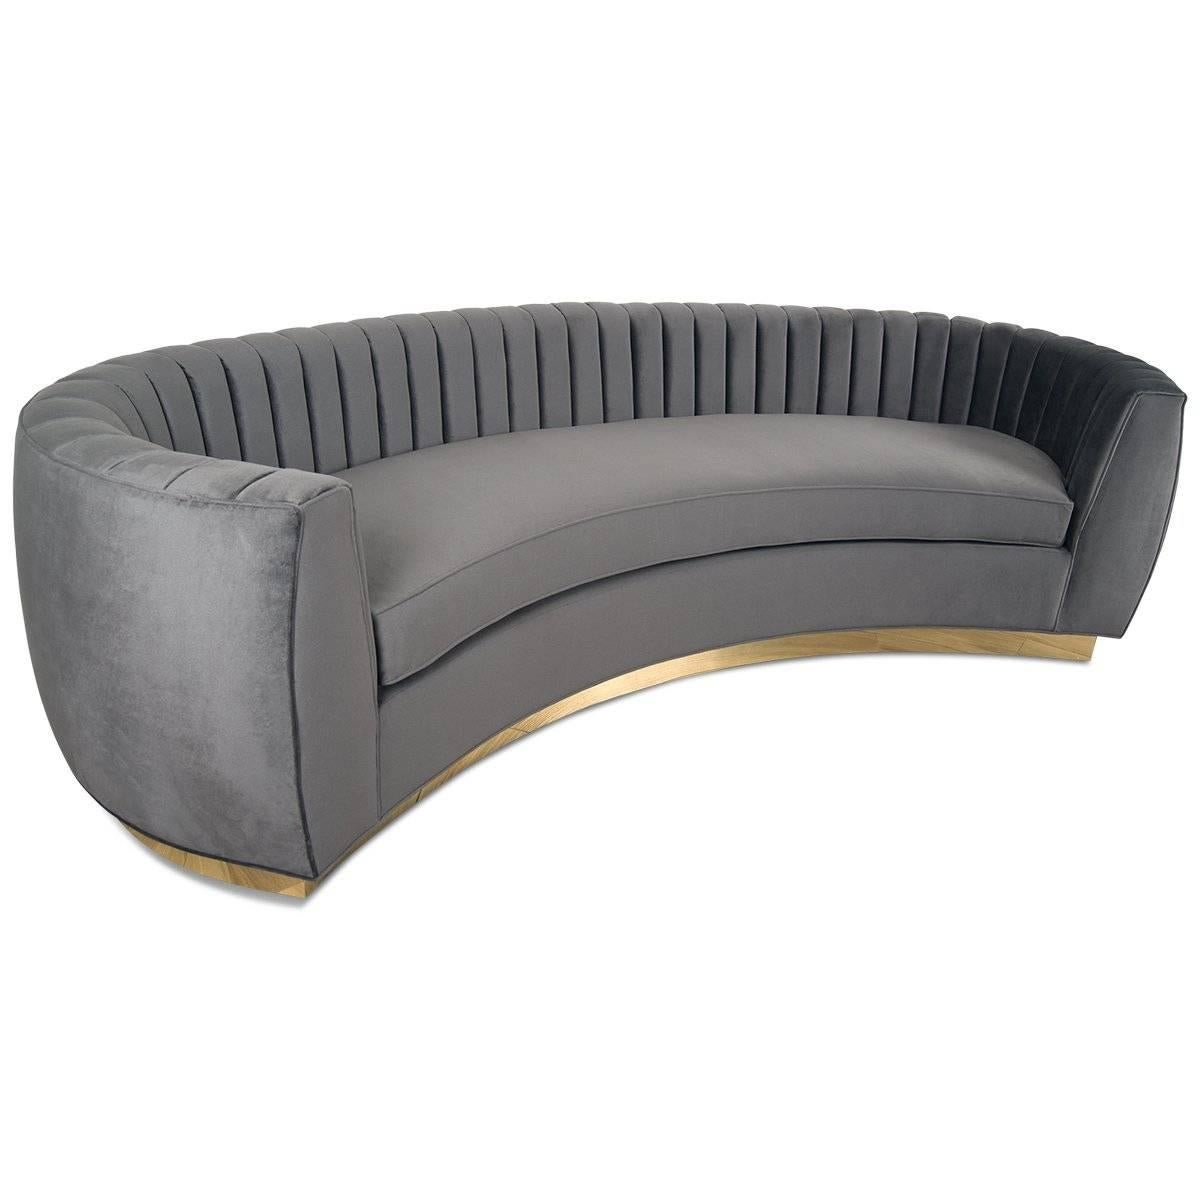 Our all-new St. Germain 9 foot sofa is similar in style to our Art Deco sofa featuring classic clean lines, sharp curves, crescent-like shape, curved in arms, and all-around Gold colored toe kick. With the long arm tufting on the backrest, this is a